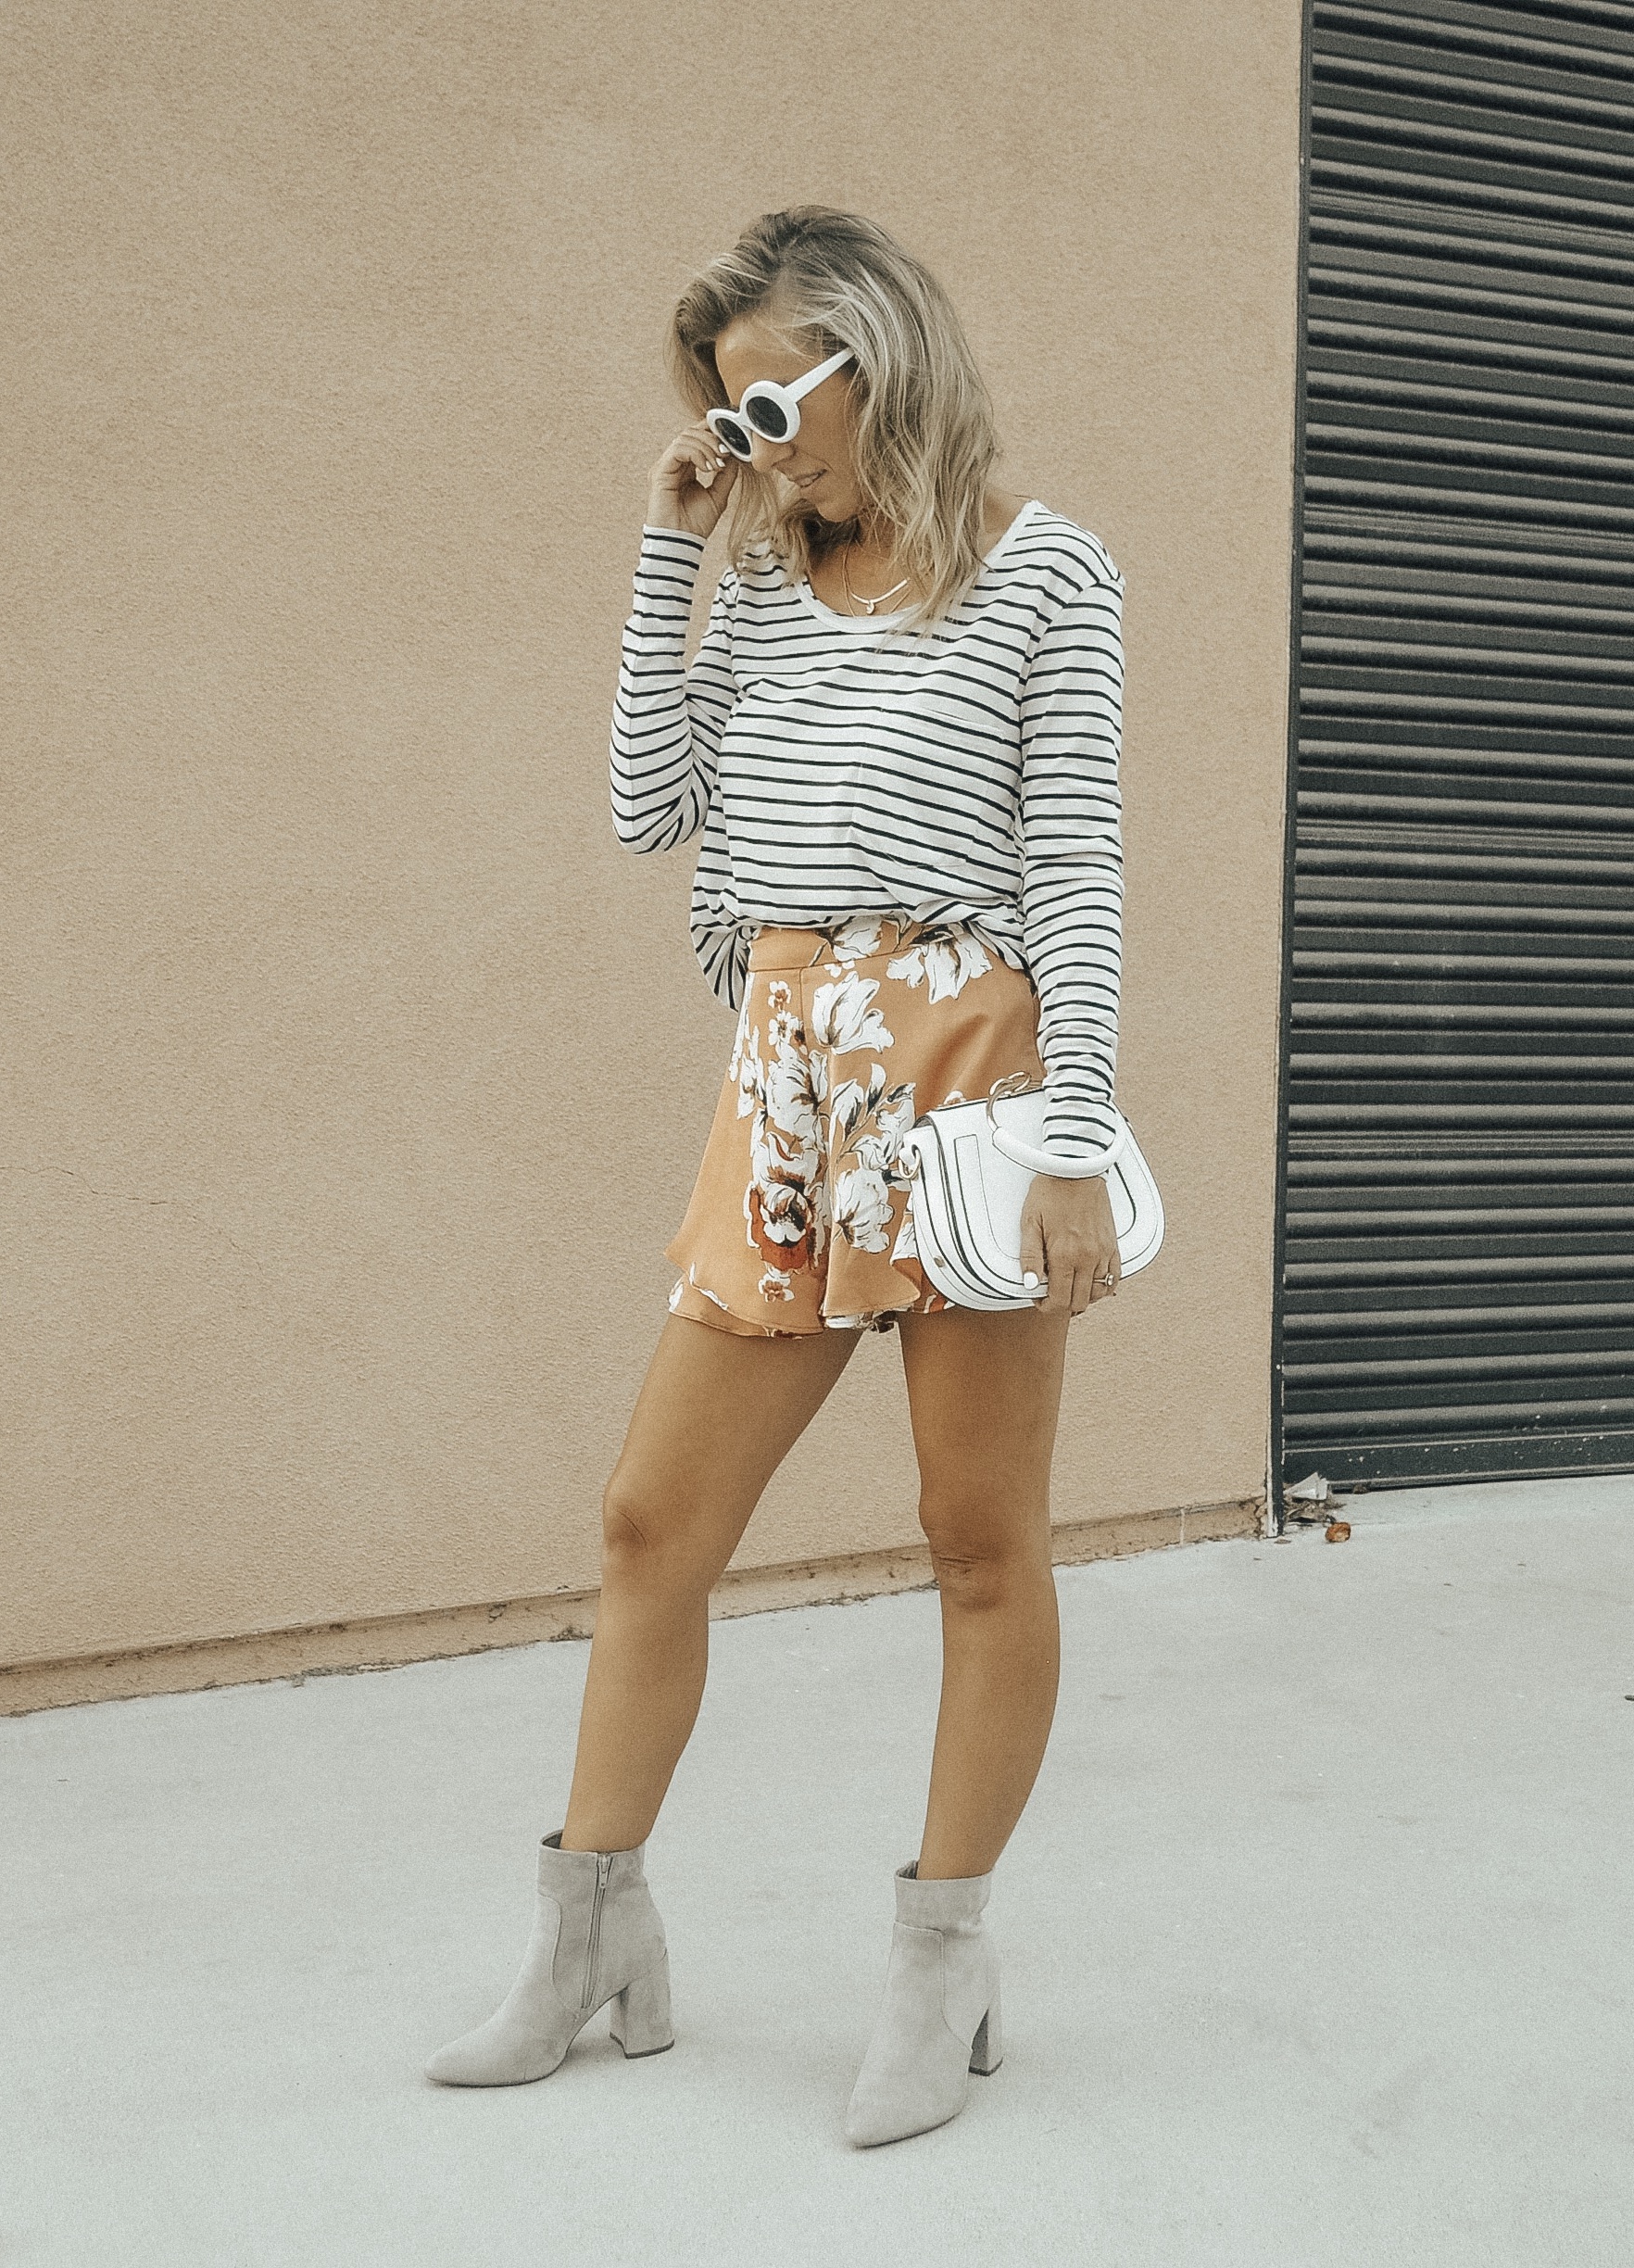 MATCHING SETS WITH BISHOP + YOUNG - Jaclyn De Leon Style + floral ruffle shorts + striped pocket tee + bohemian + gray block heel booties + fall outfit + summer style + casual street style + boho chic + Nordstrom + Zappos + Versatility of matching sets + mix and match